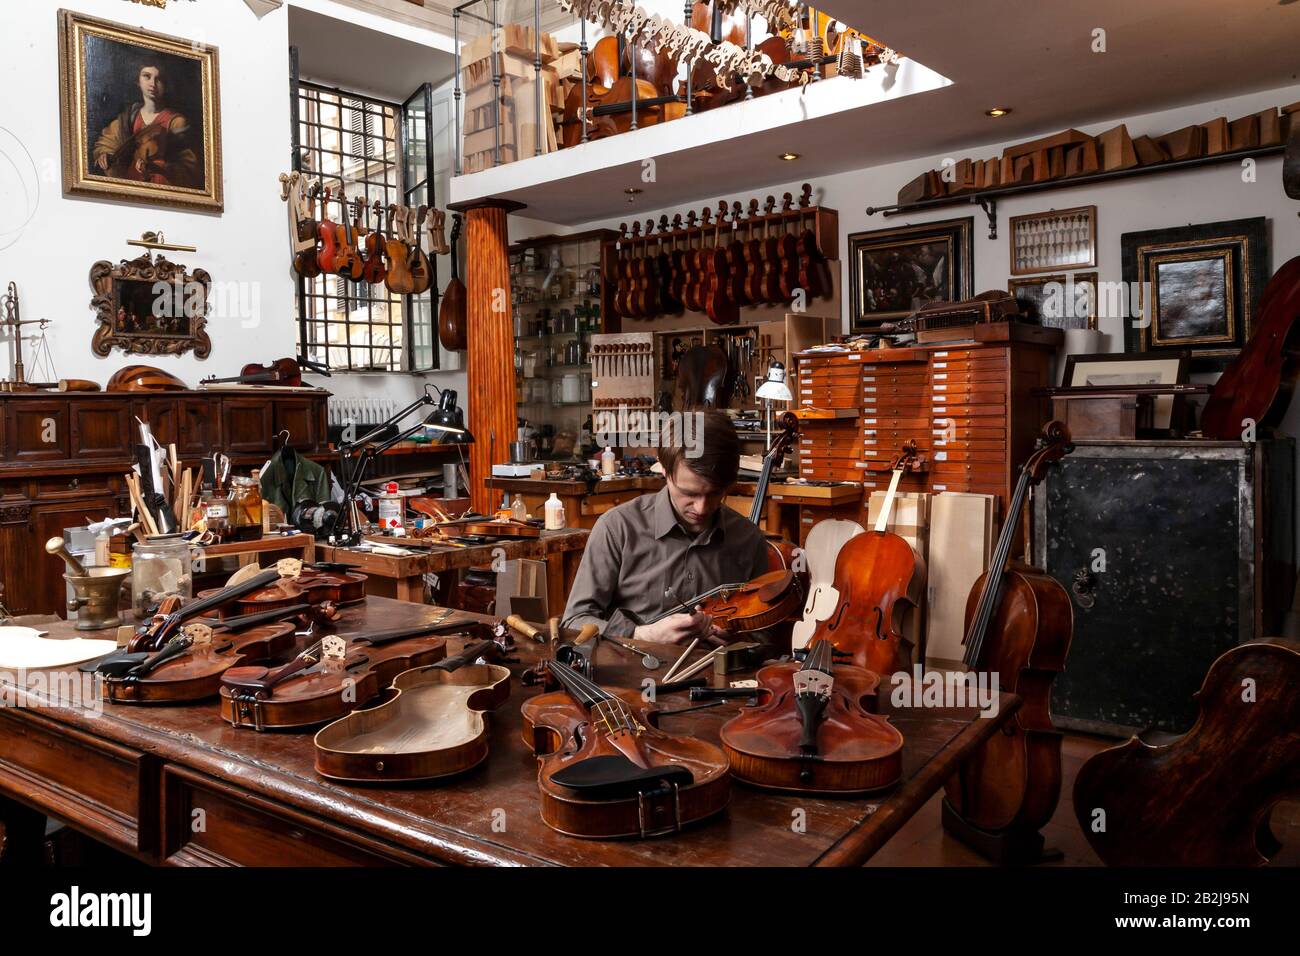 Luthier violin maker working on making a violin in a workshop Stock Photo -  Alamy